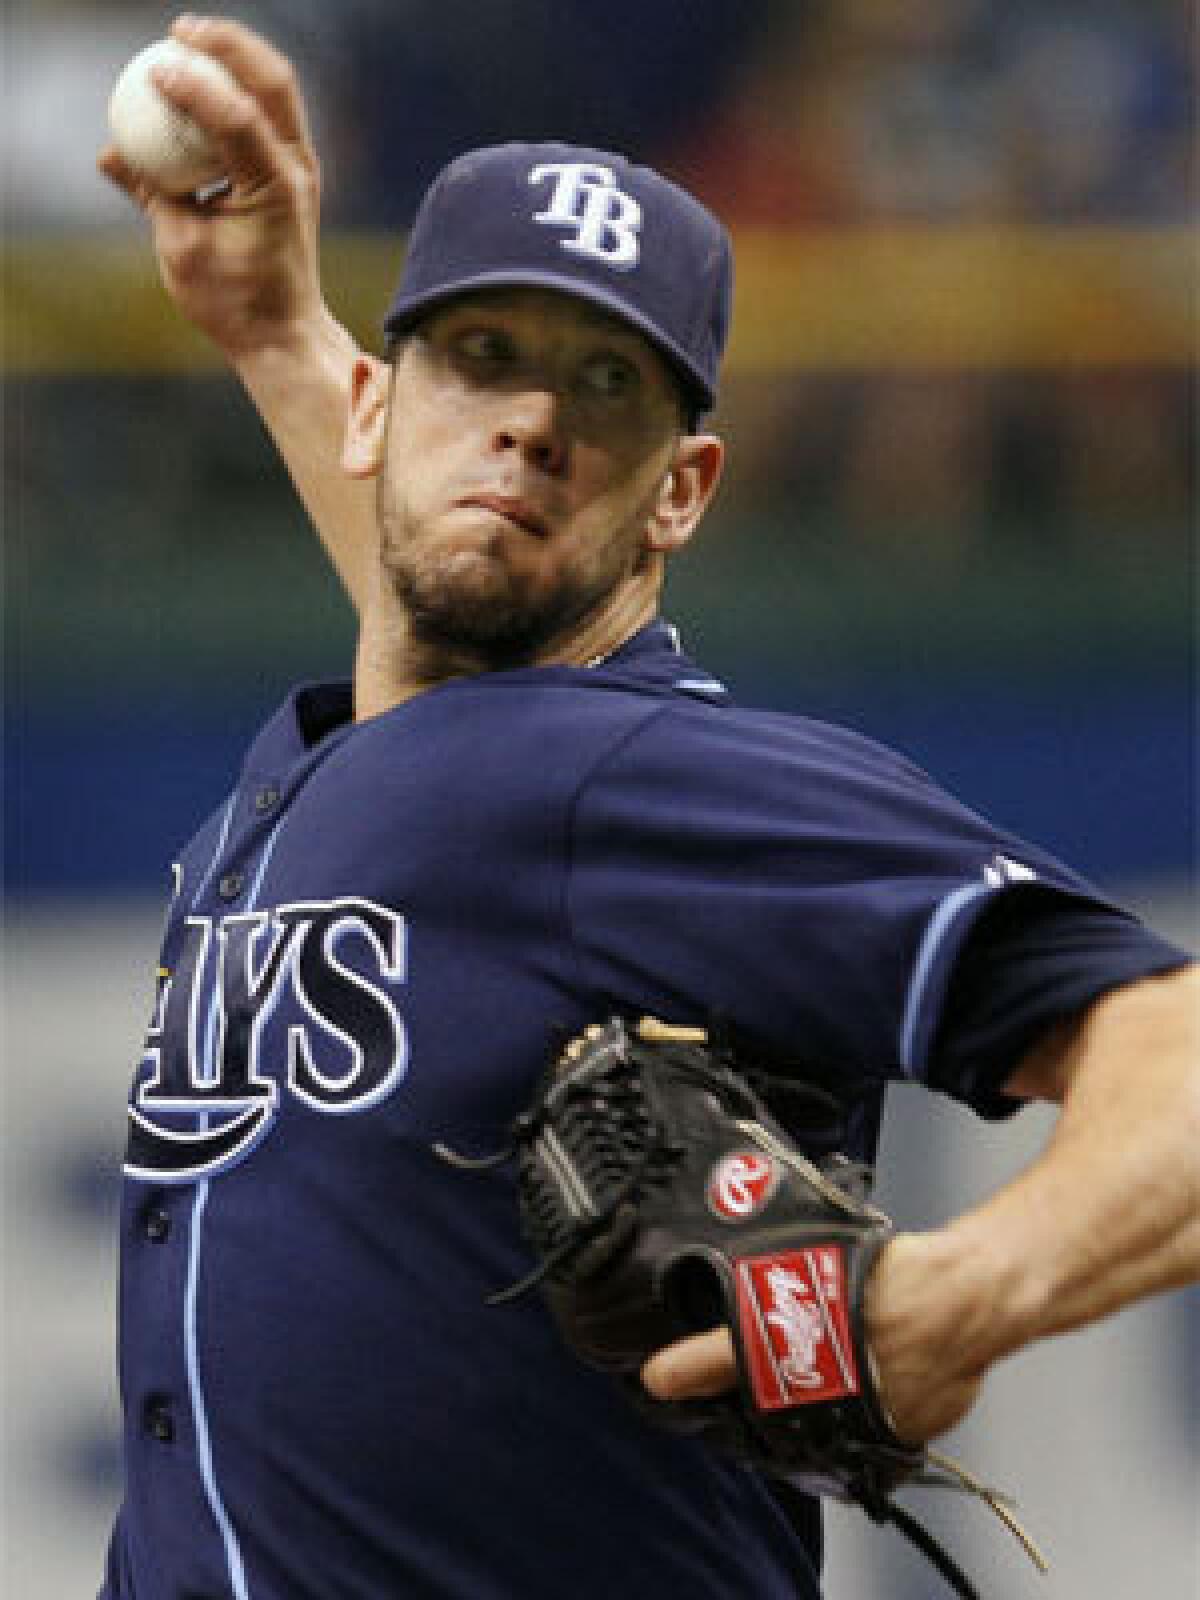 James Shields was 15-10 with a 3.52 ERA for the Tampa Bay Rays last season.